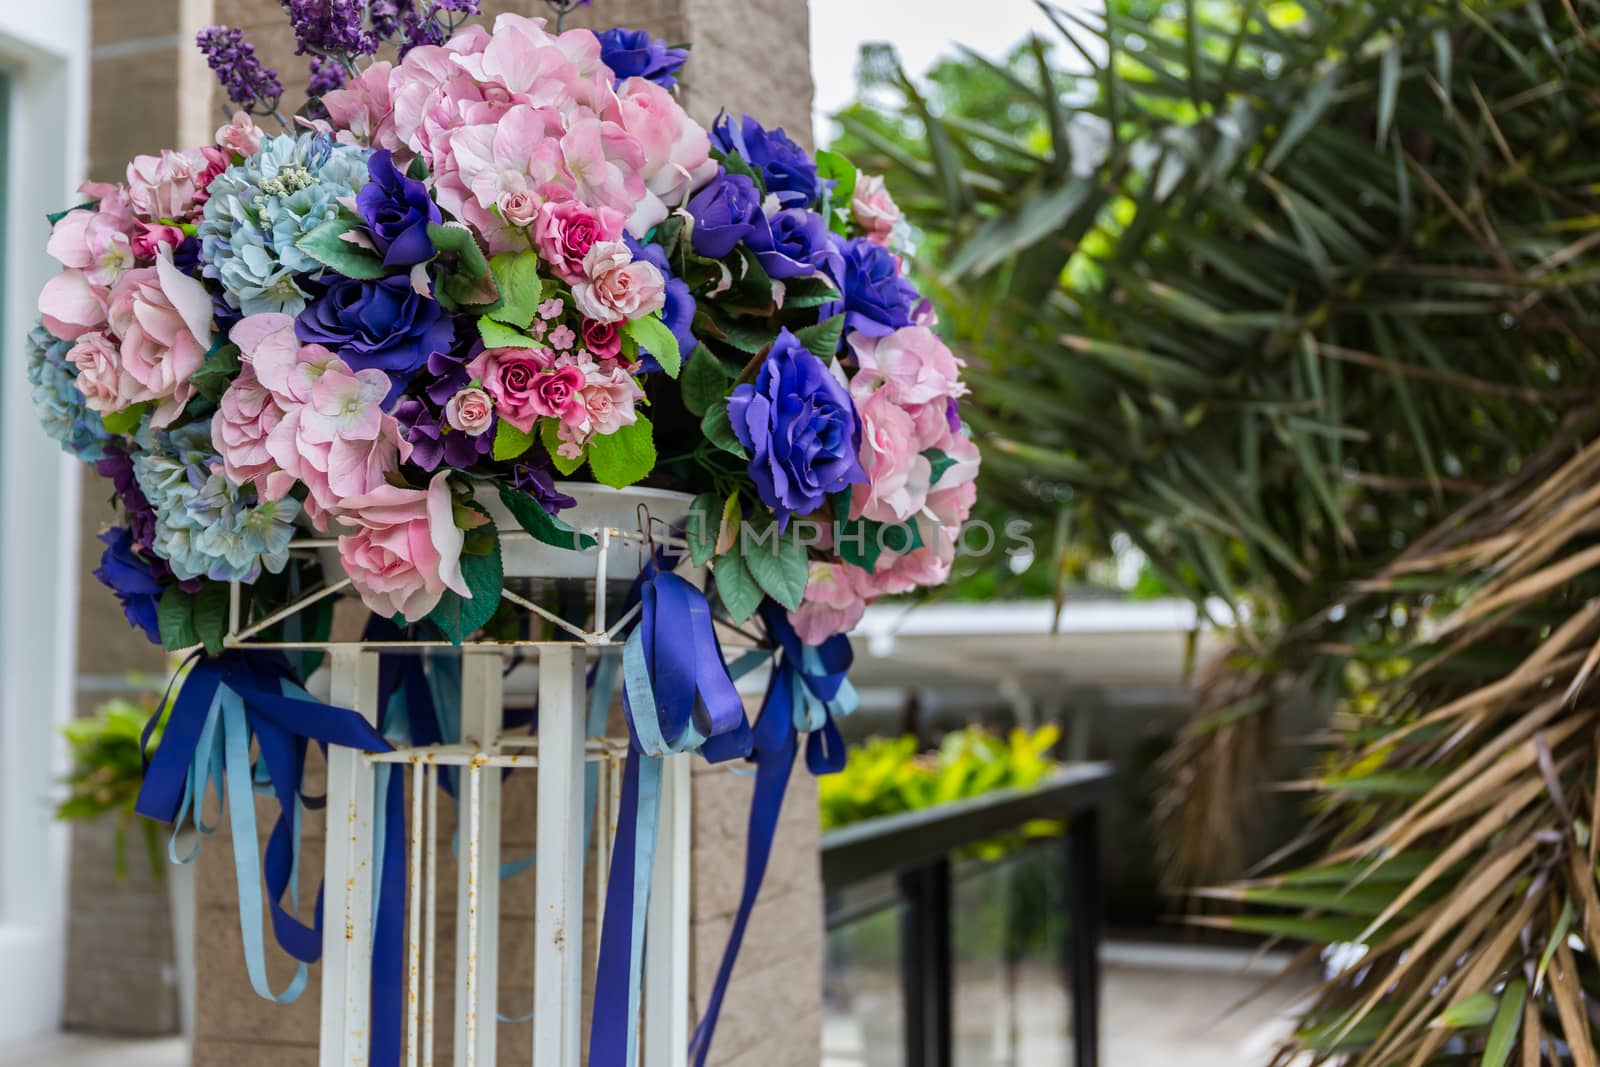 Colorful artificial flower bouquet in front of house.